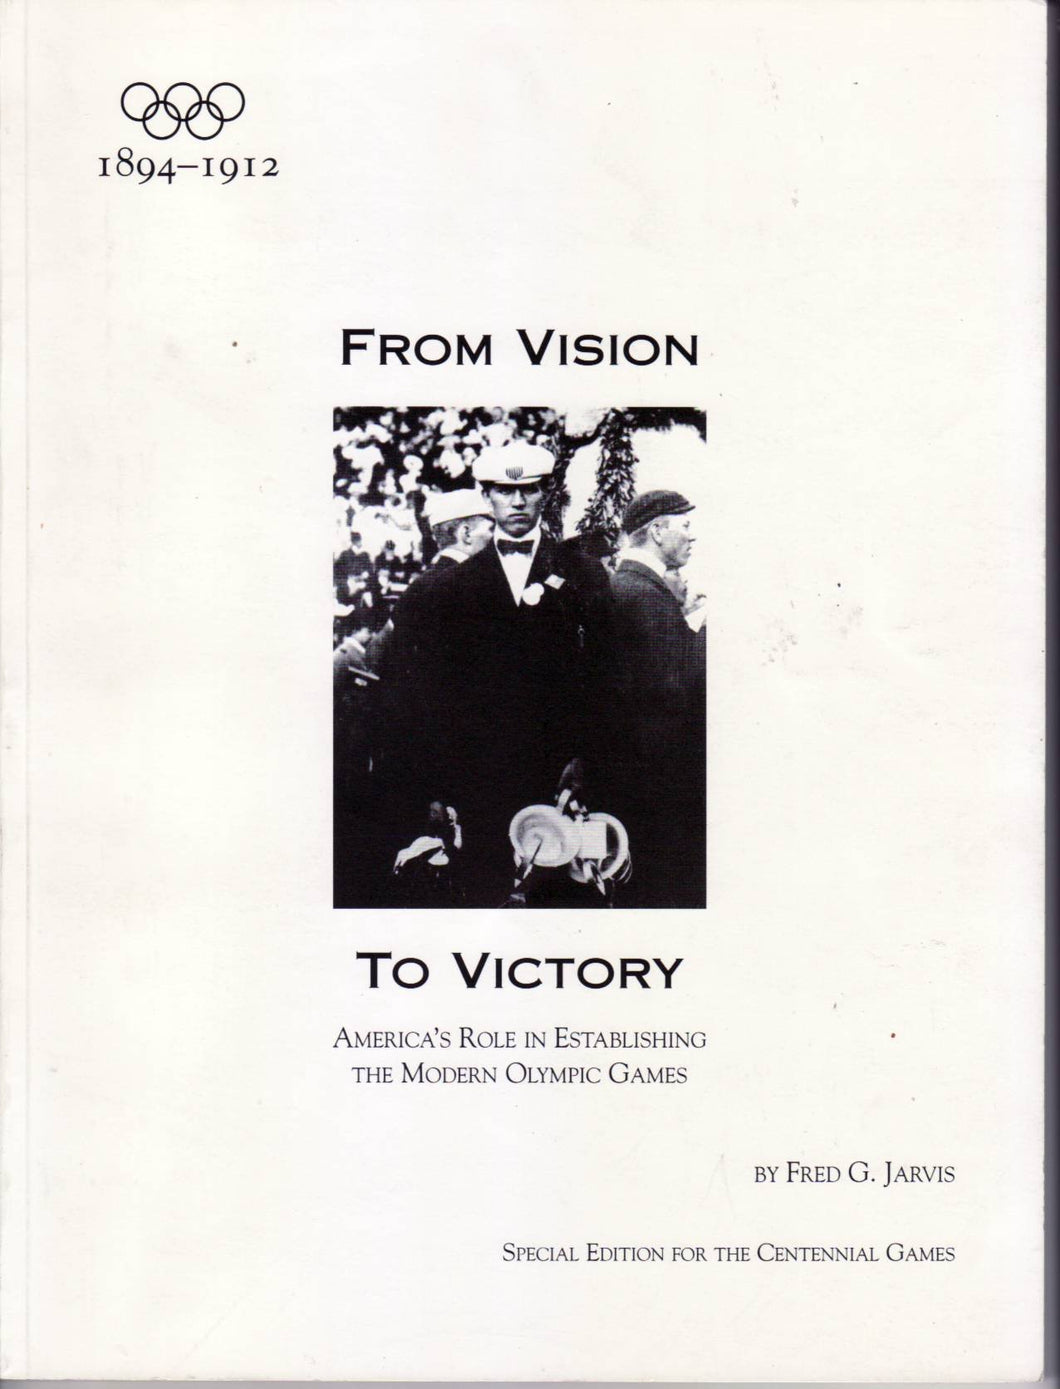 From vision to victory: America's role in establishing the modern Olympic Games : 1894-1912